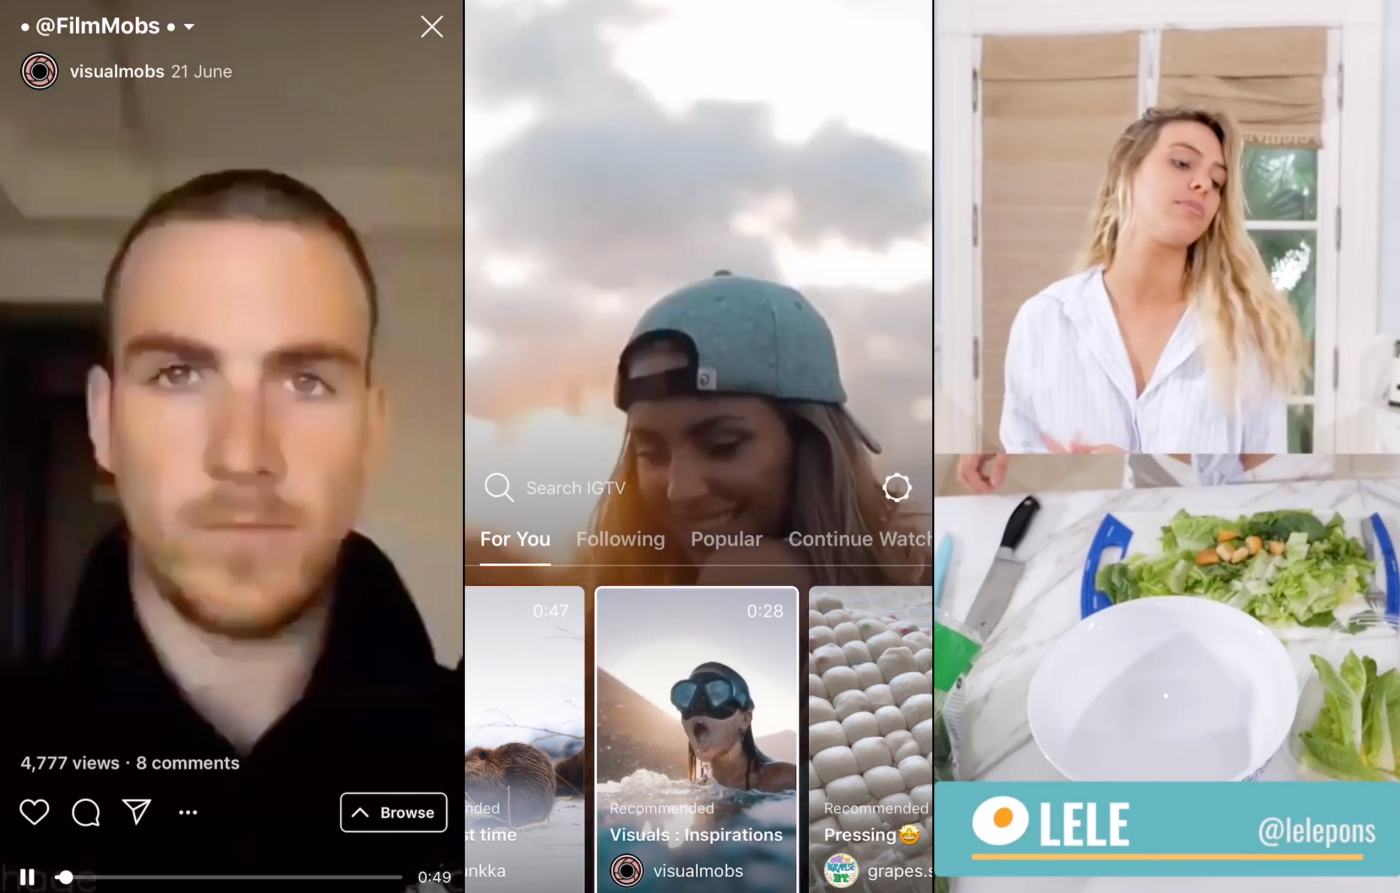 IGTV screenshots from visualmobs and lelepons